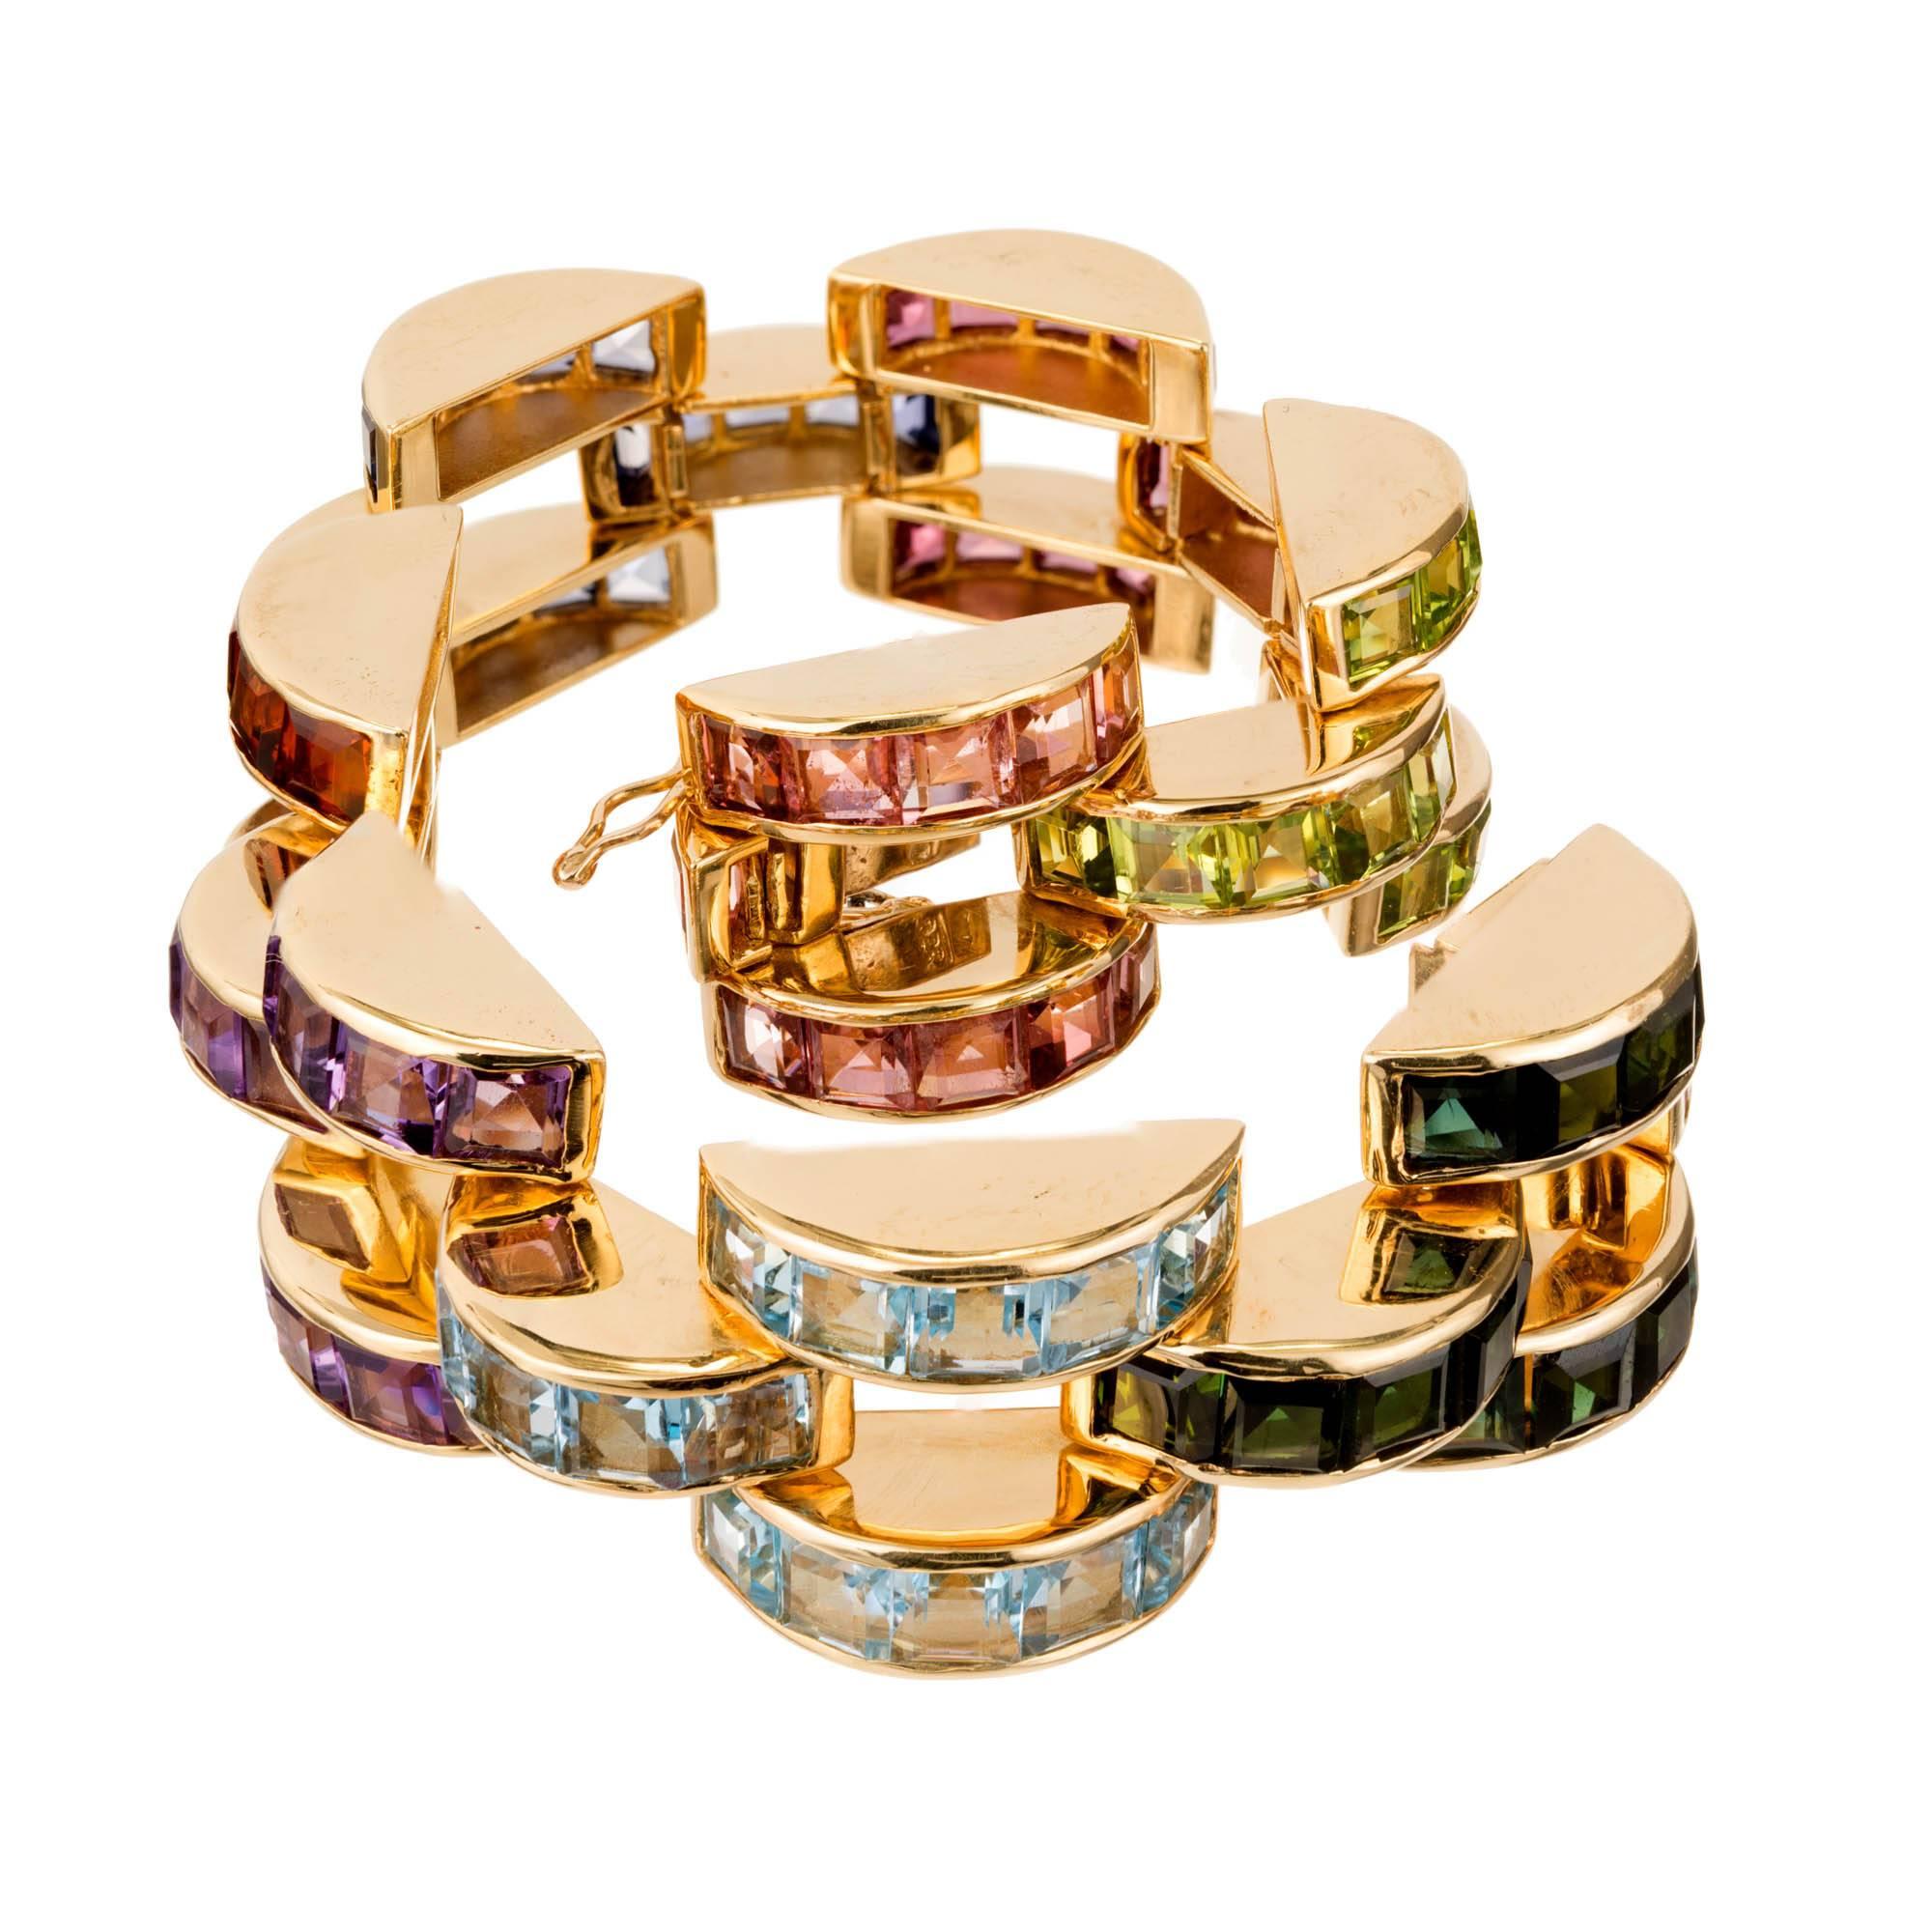 Domed channel set link bracelet with 8 different sets of colored stones of semi-precious varieties all presumed simple heat treated or irradiated, set in 14k yellow gold. 

15 green step cut Tourmaline, approx. total weight 4.00cts, VS, 4.2 x